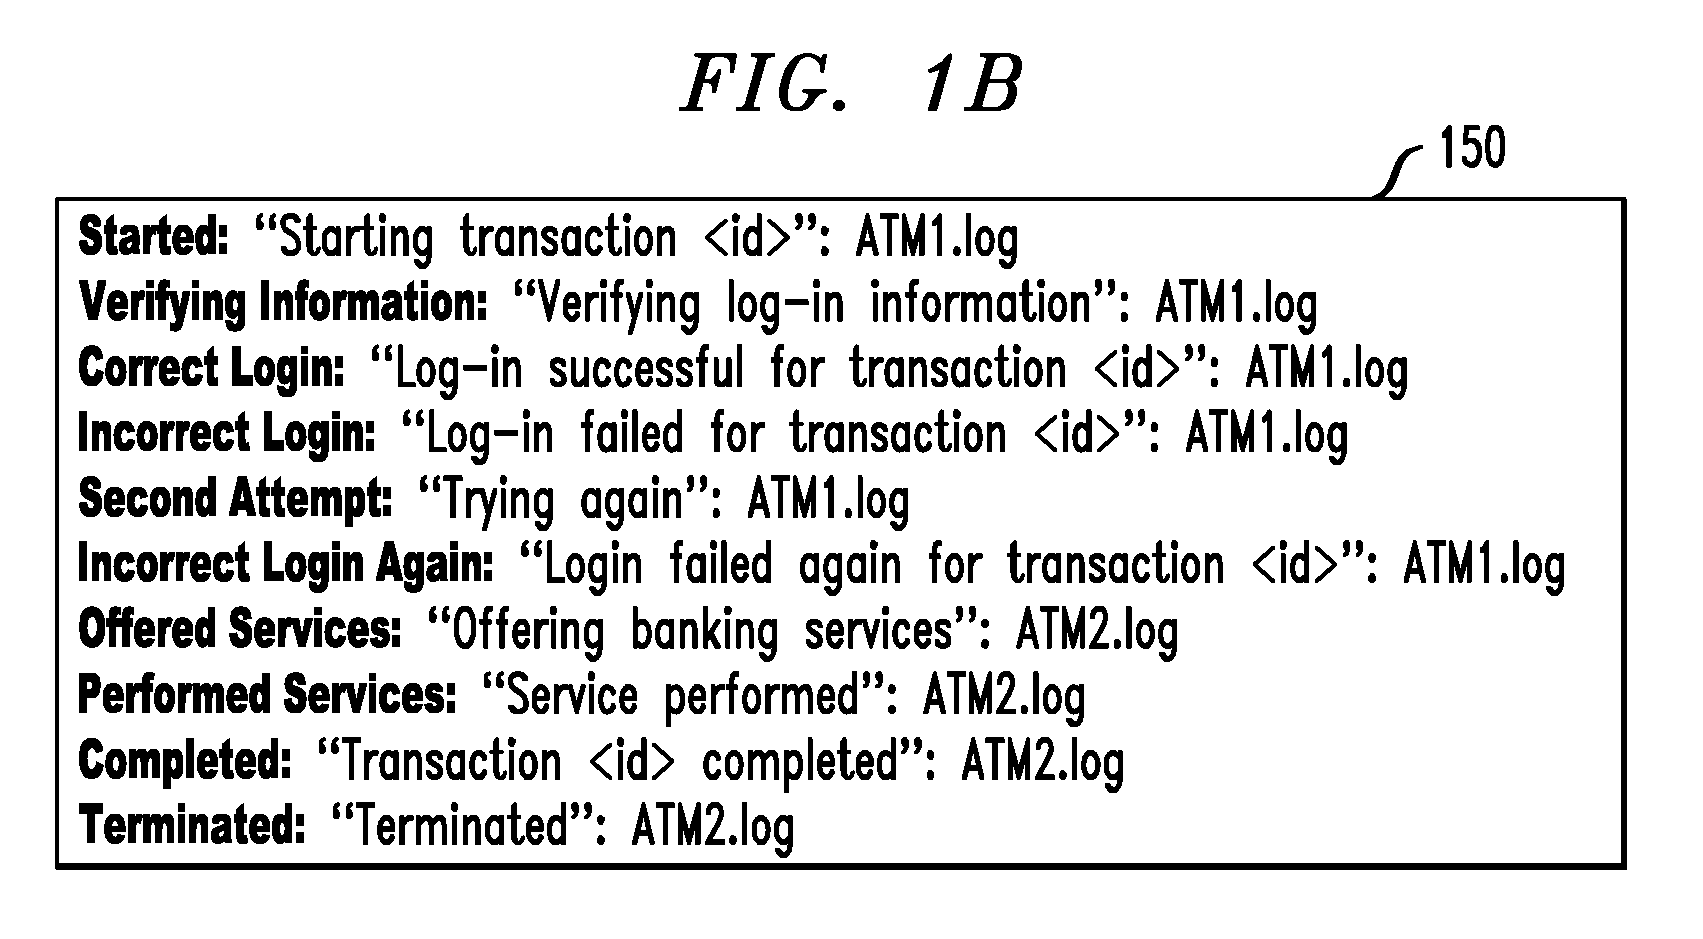 System using footprints in system log files for monitoring transaction instances in real-time network